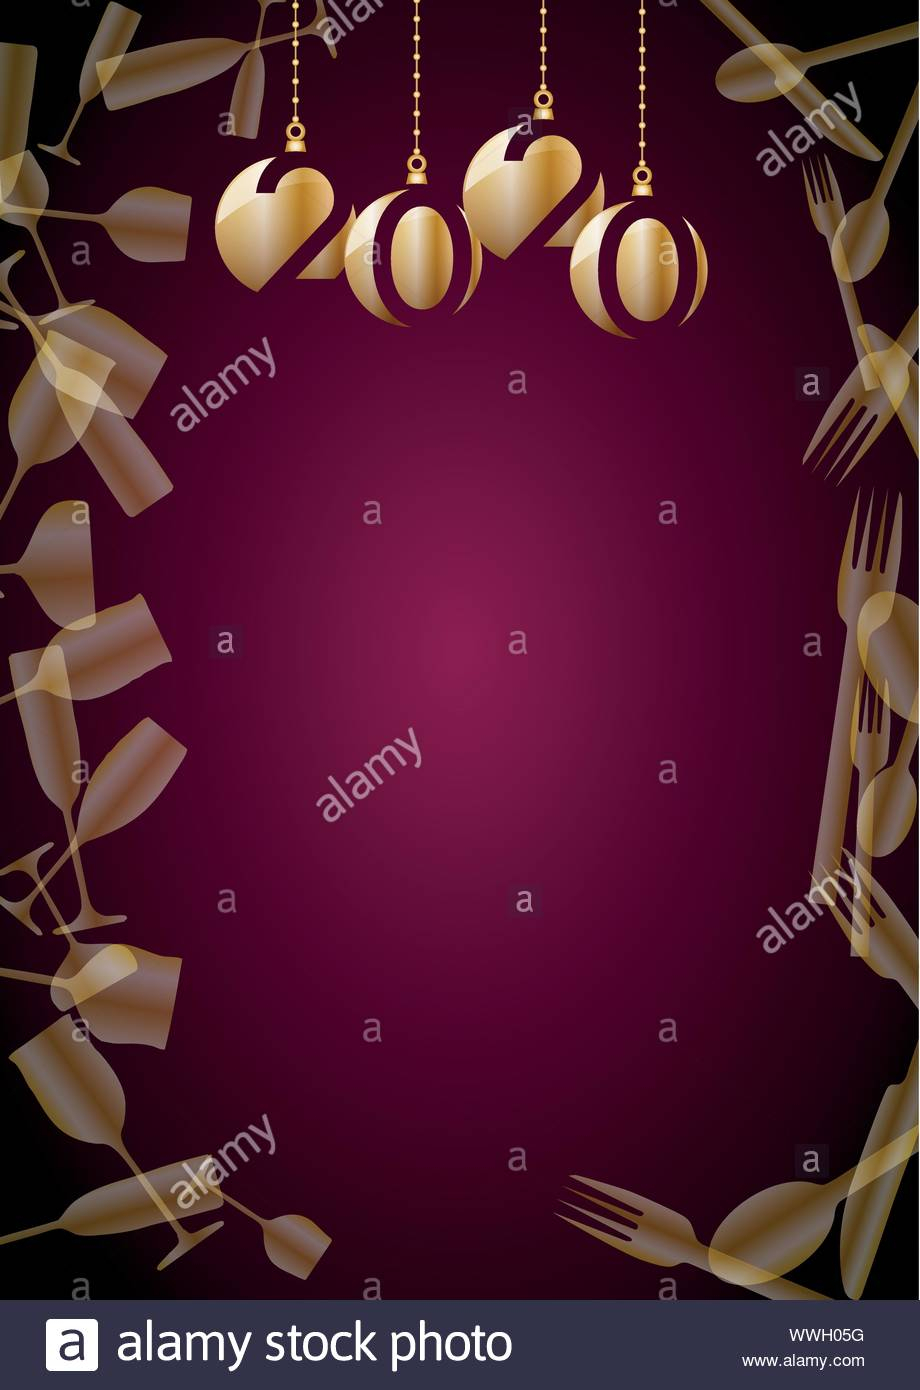 2020, New Year's Eve Dinner, Template For Poster, Cover And Regarding New Years Eve Menu Template